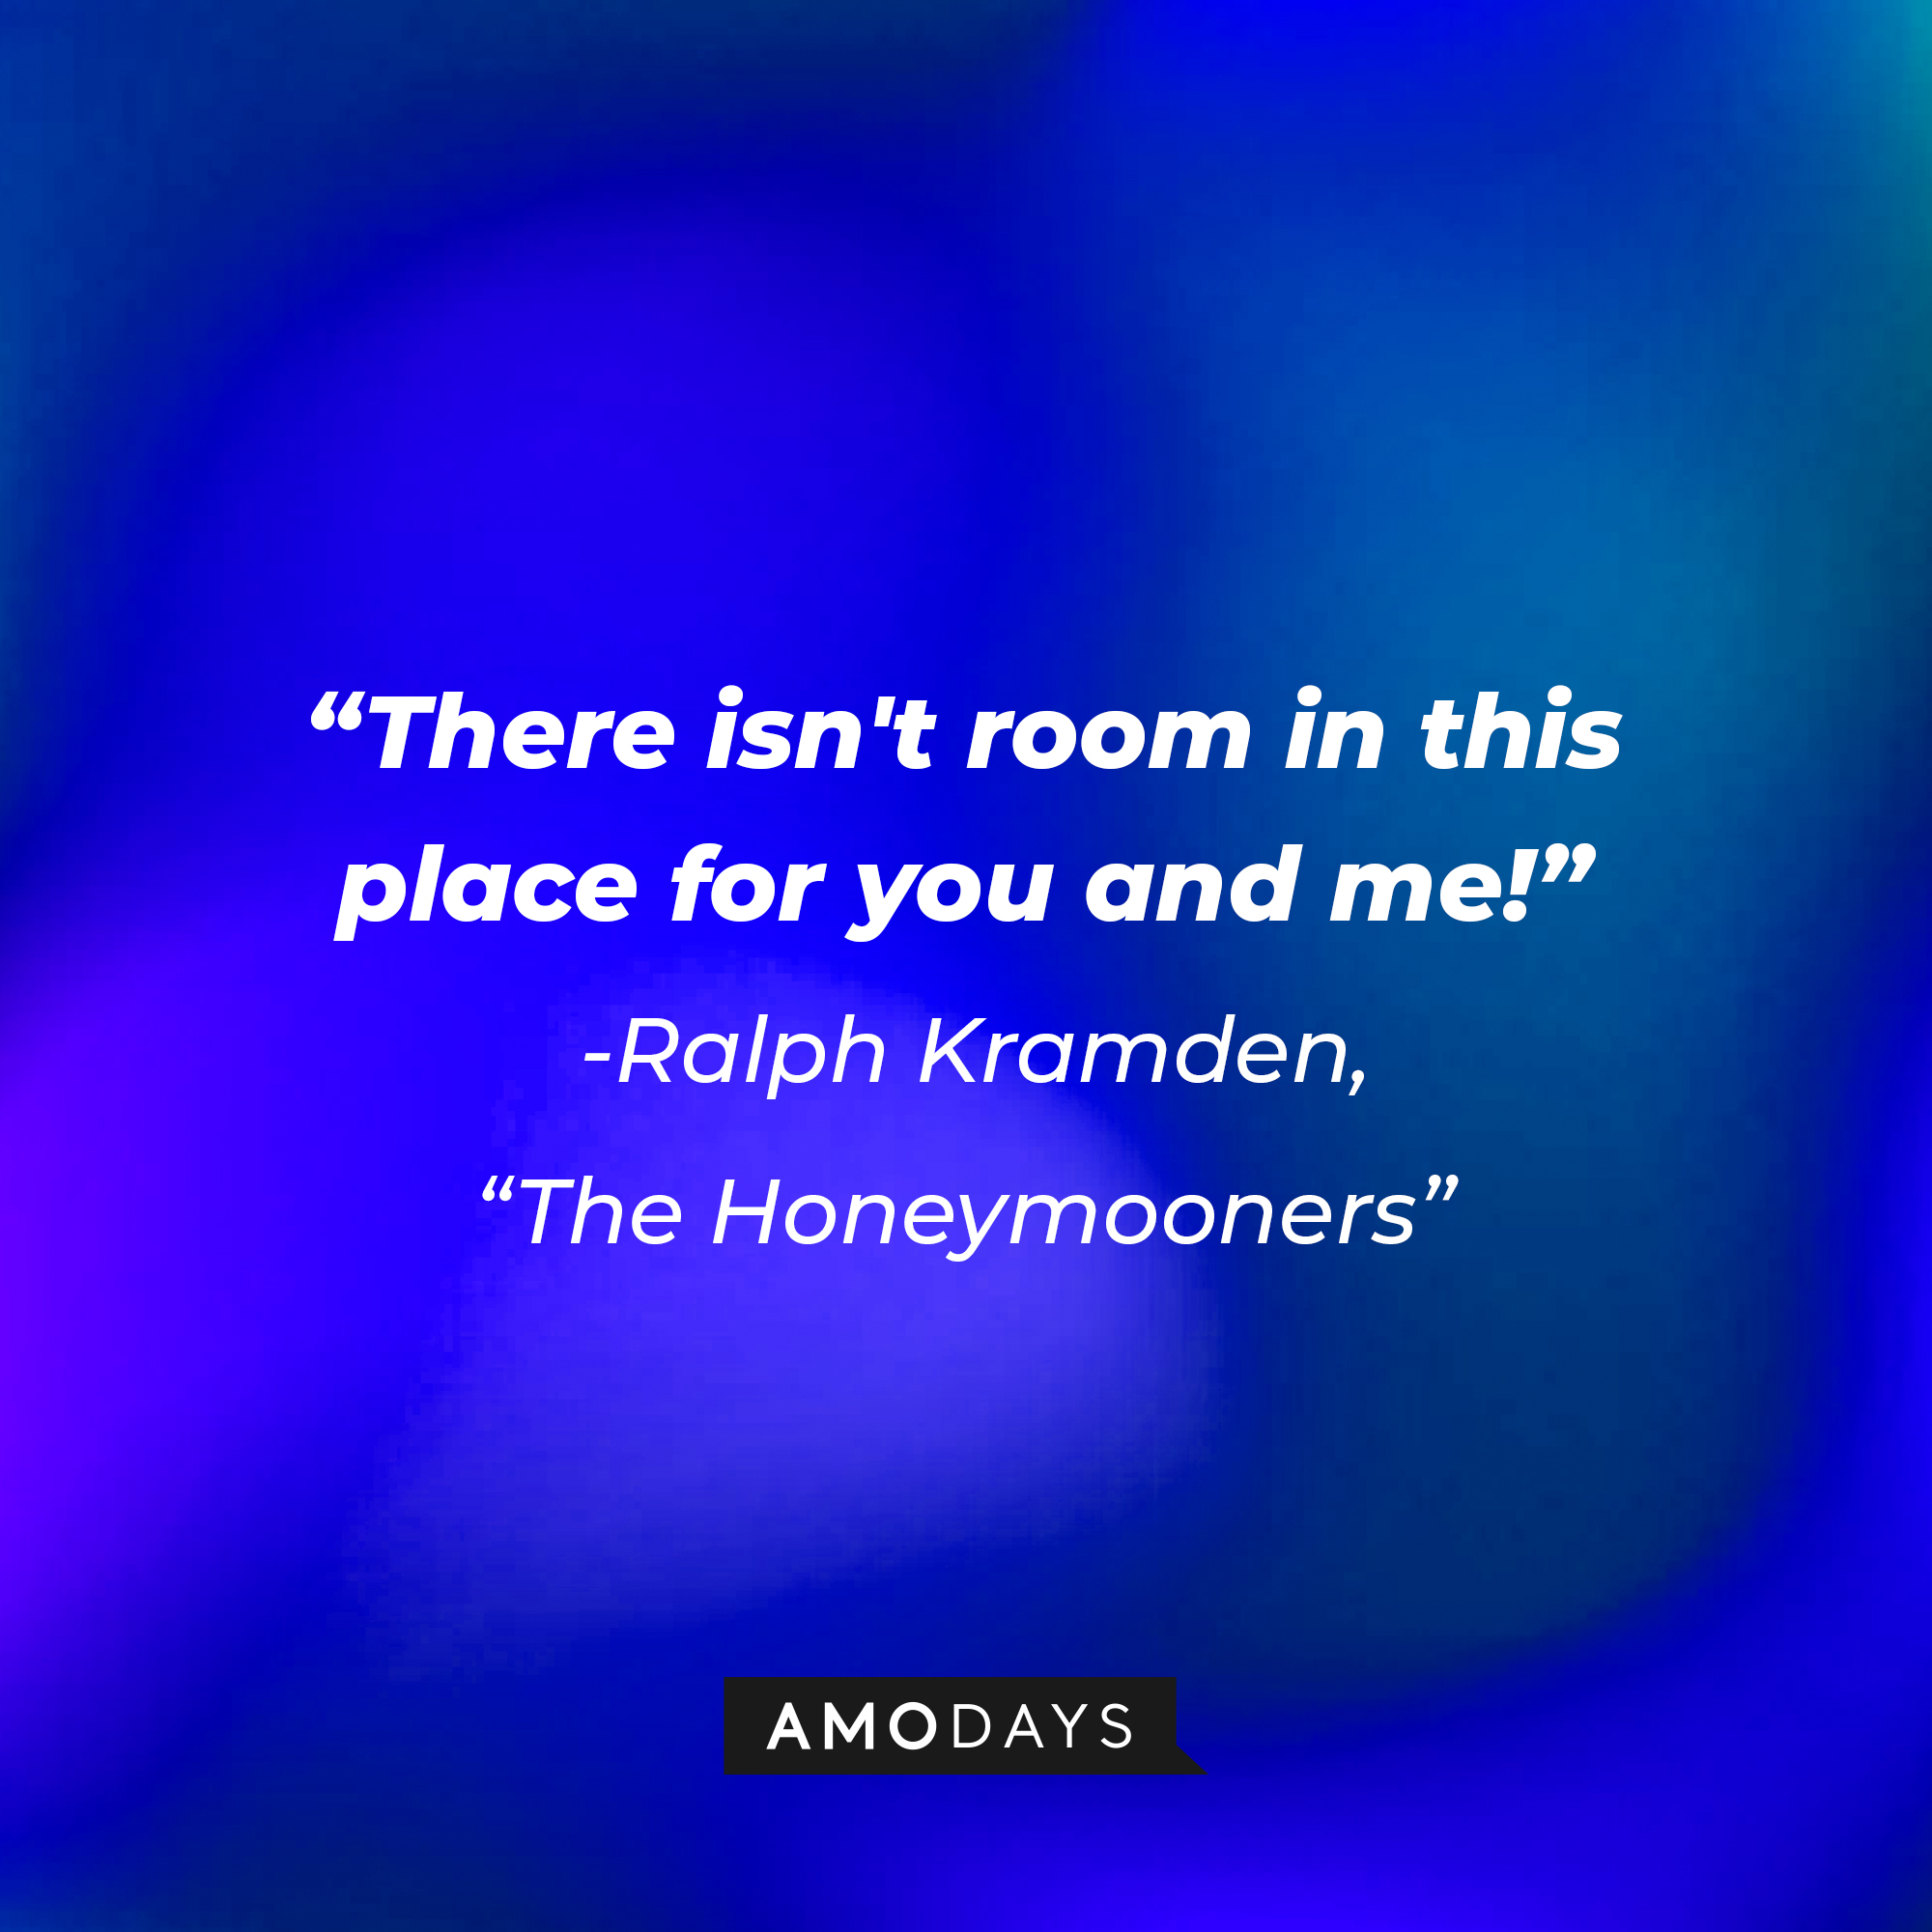 A quote from "The Honeymooners" star Ralph Kramden: "There isn't room in this place for you and me!" | Source: AmoDays